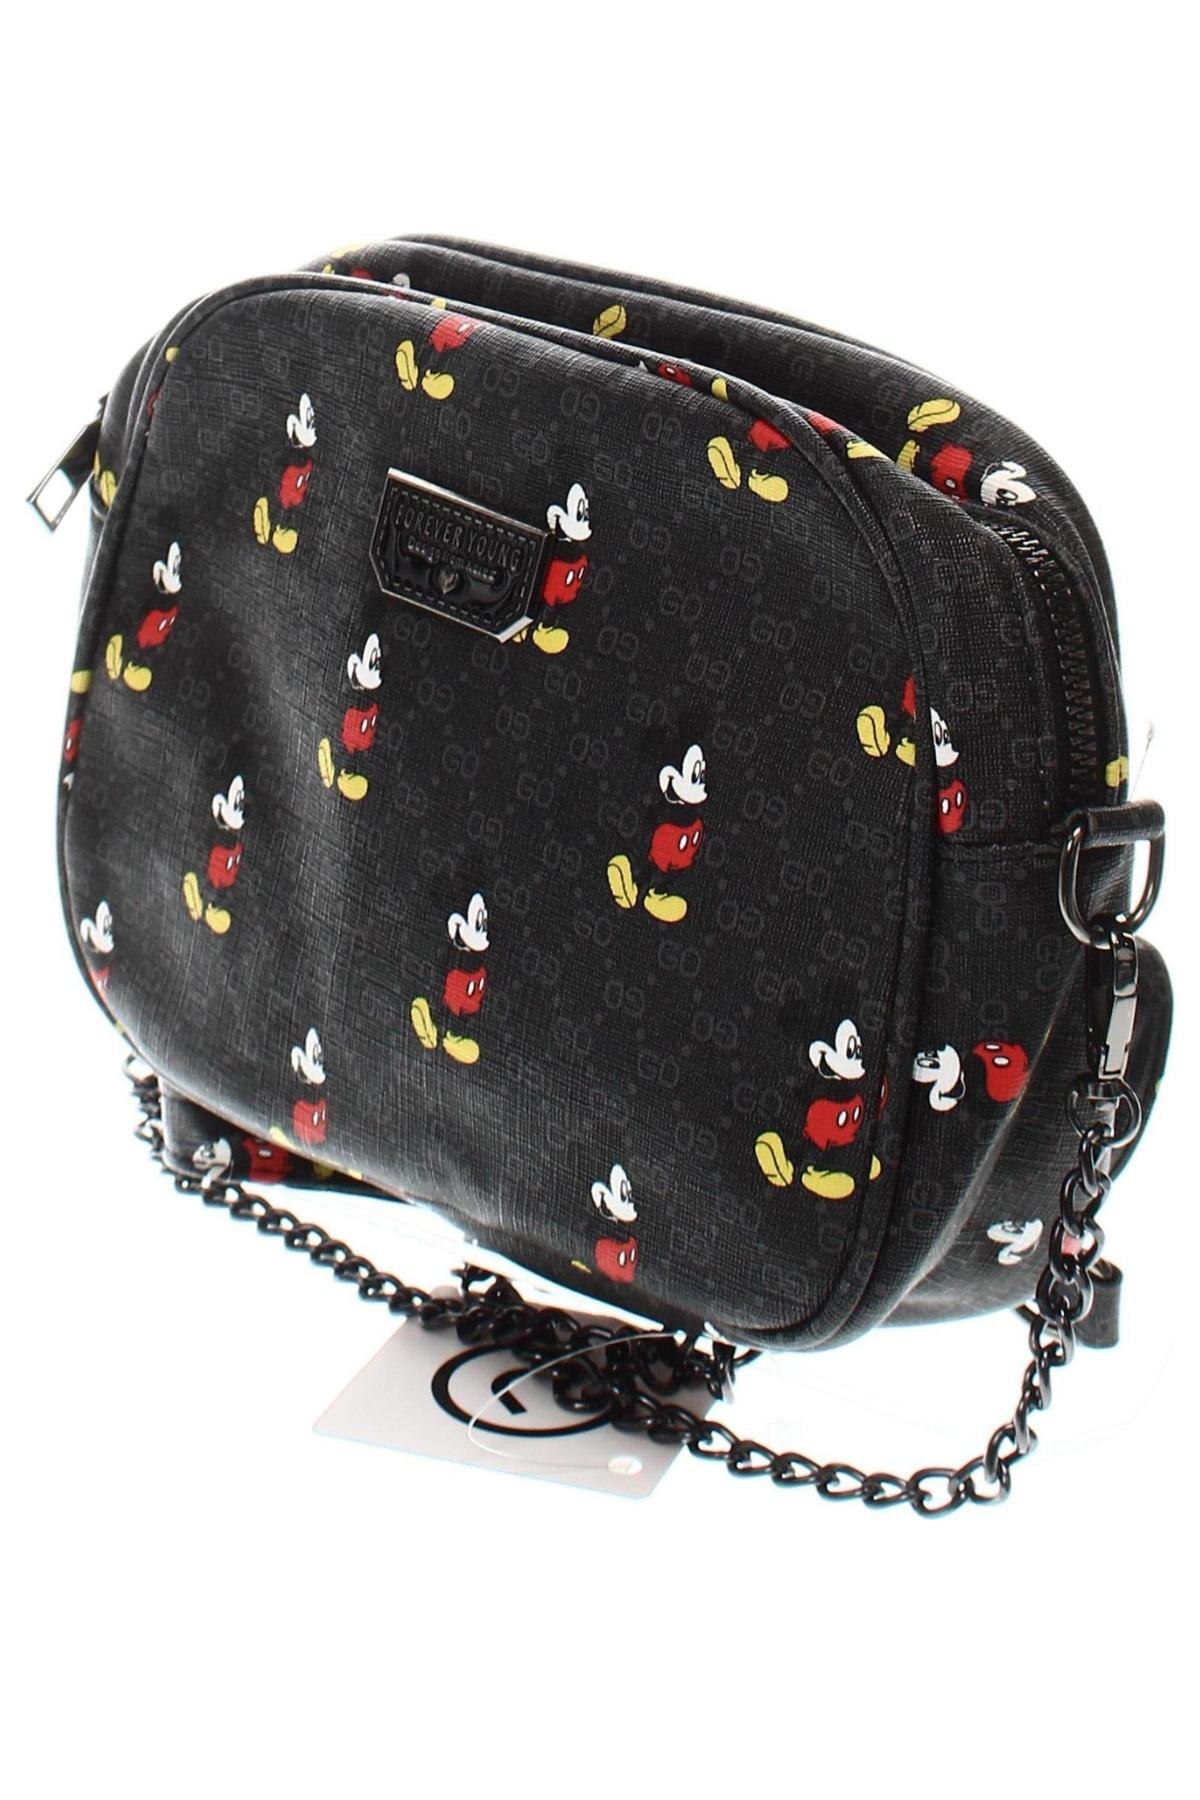 Kindertasche Forever Young by Chicoree, Farbe Schwarz, Preis € 11,83